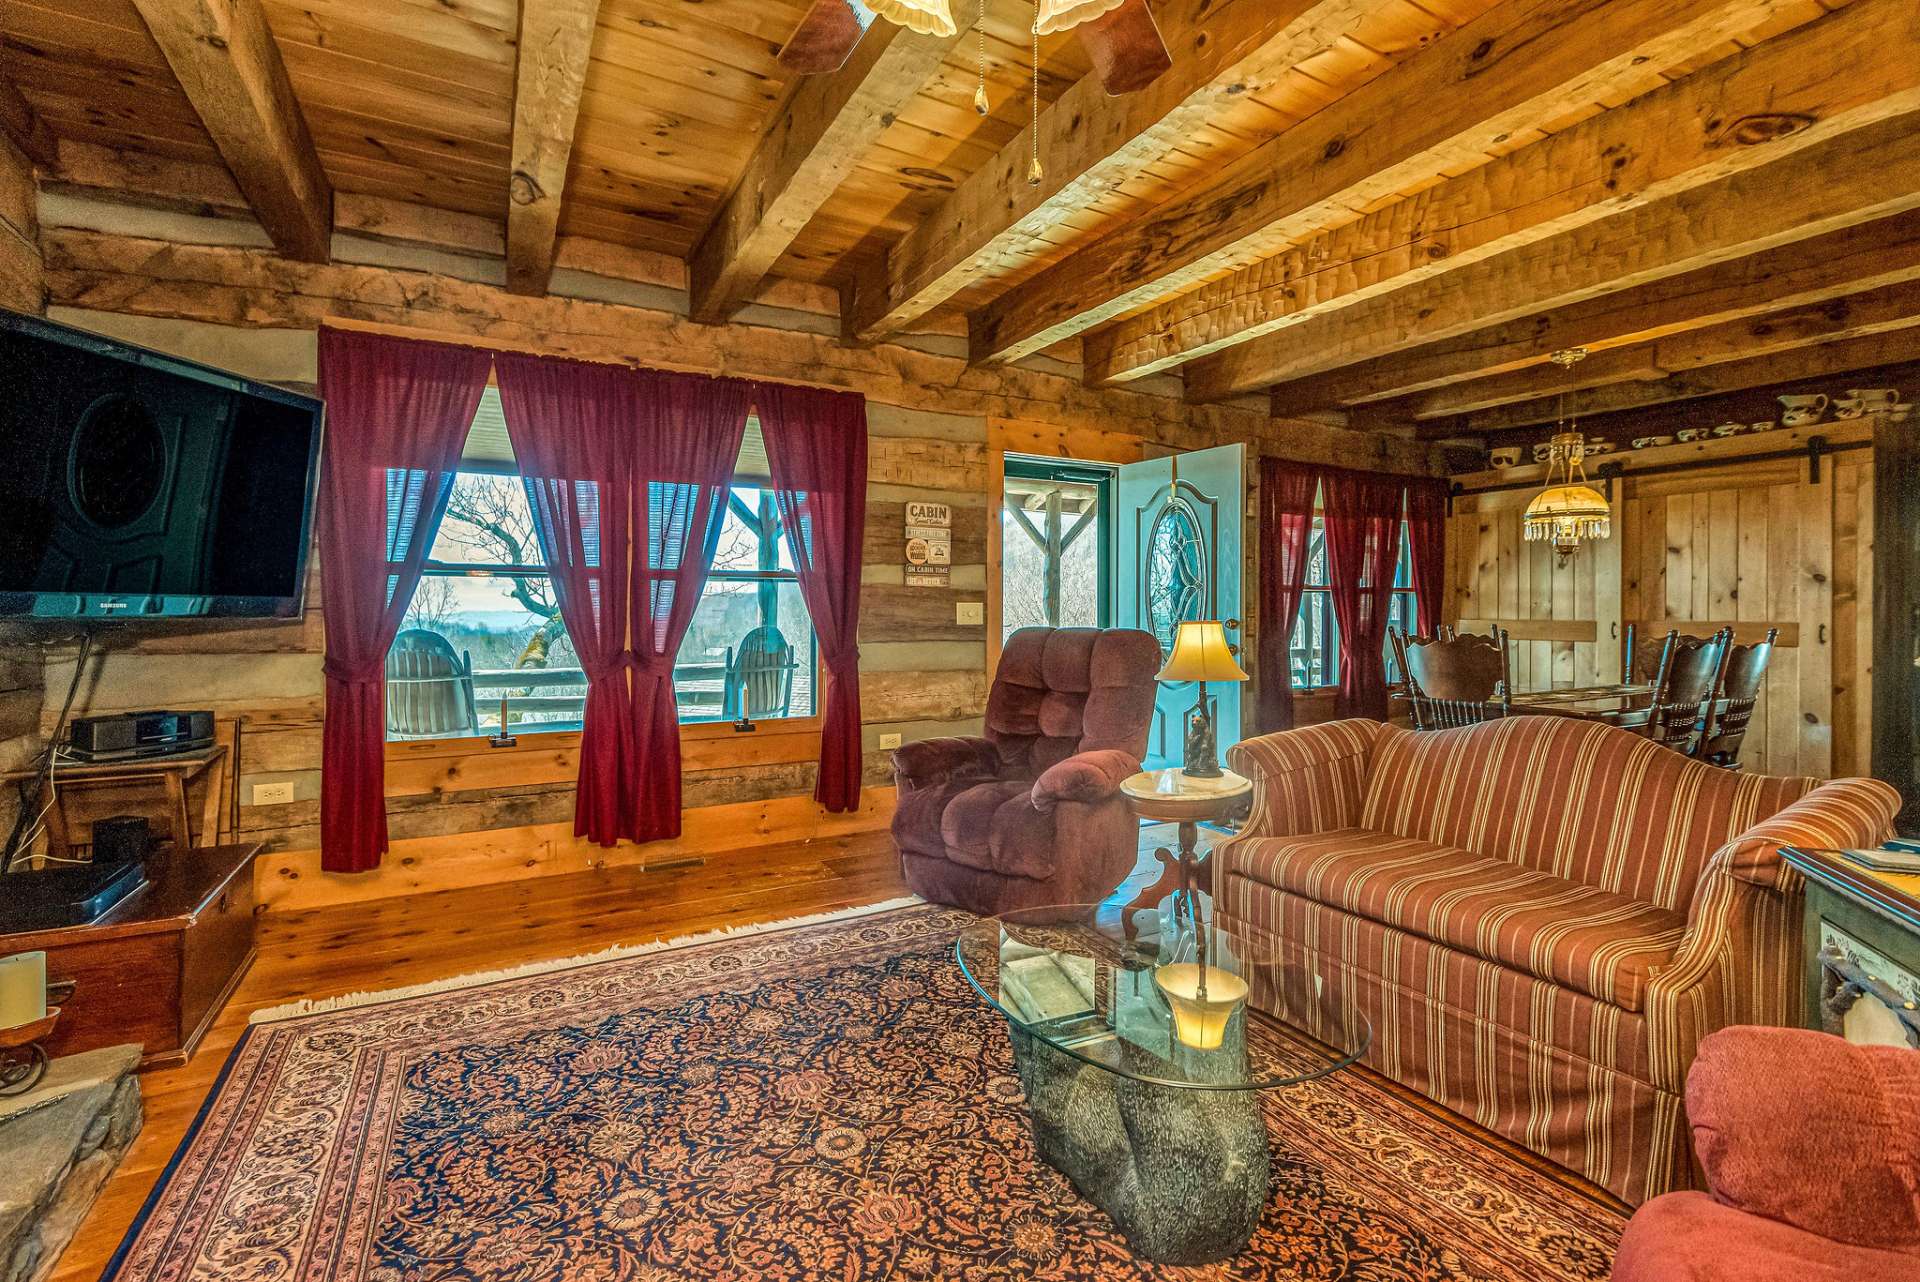 The rustic beamed ceilings add to the mountain feel!